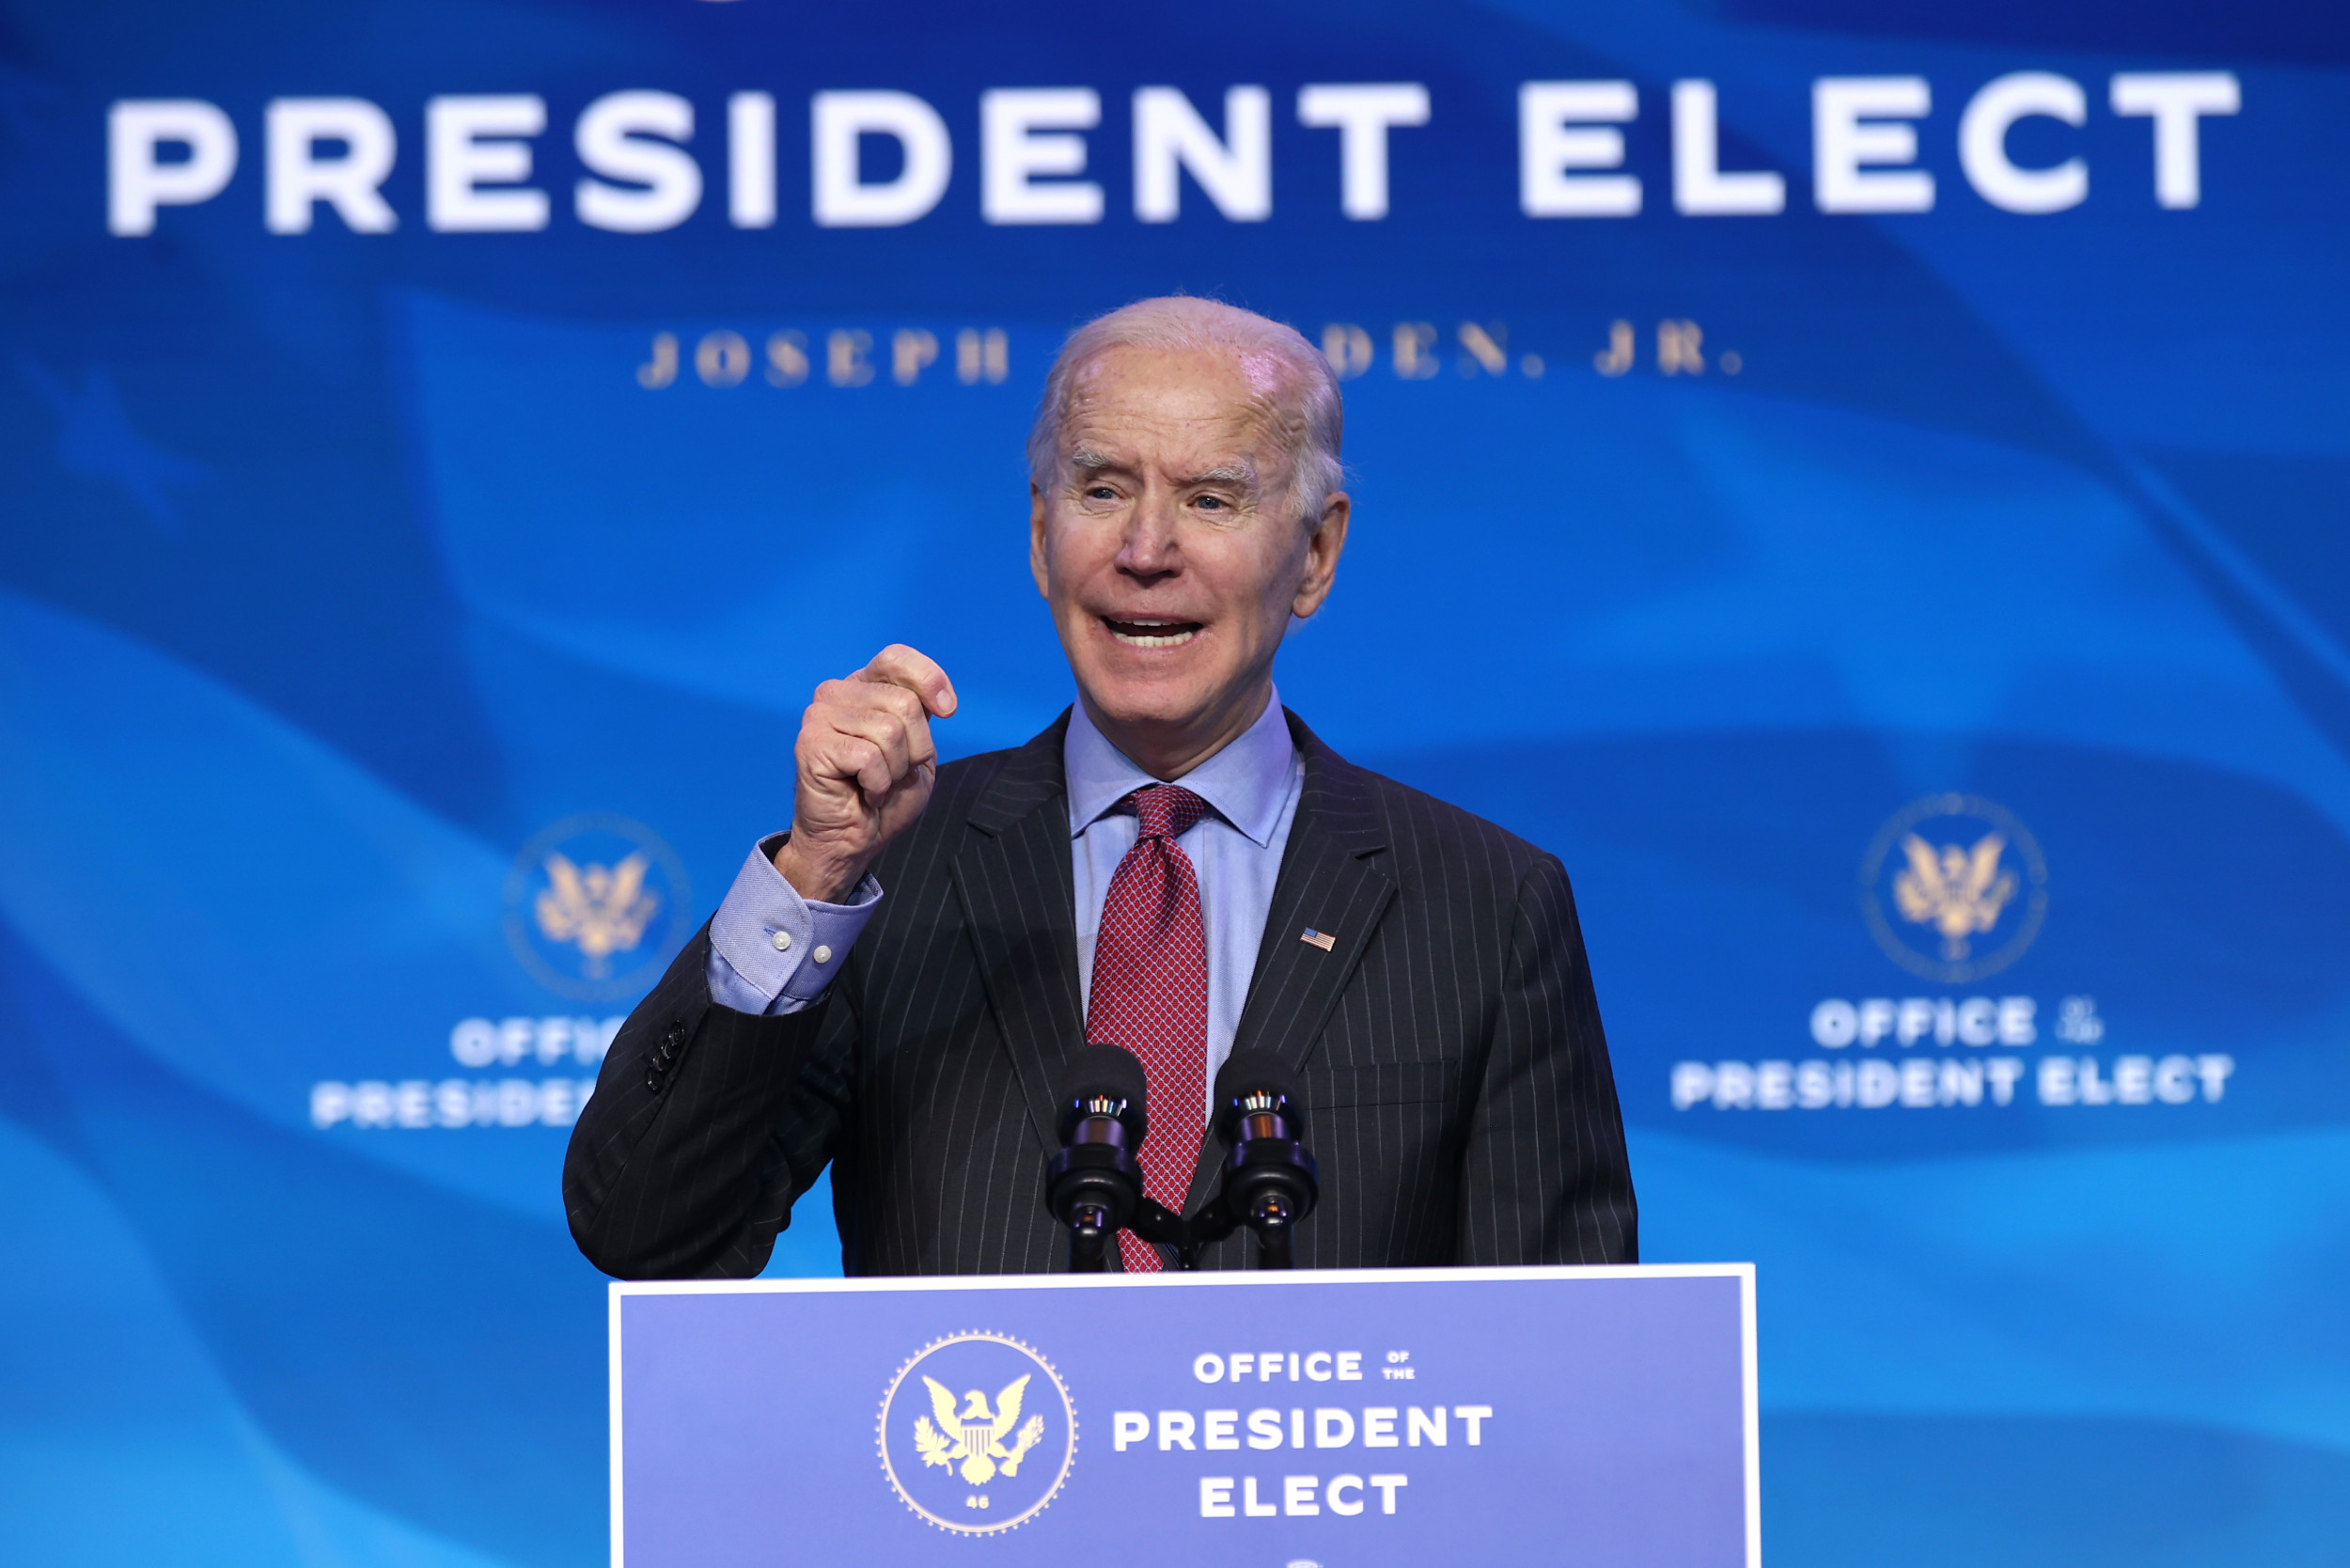 $ 2,000 stimulus checks are expected to be part of Joe Biden’s Emerging Aid Plan